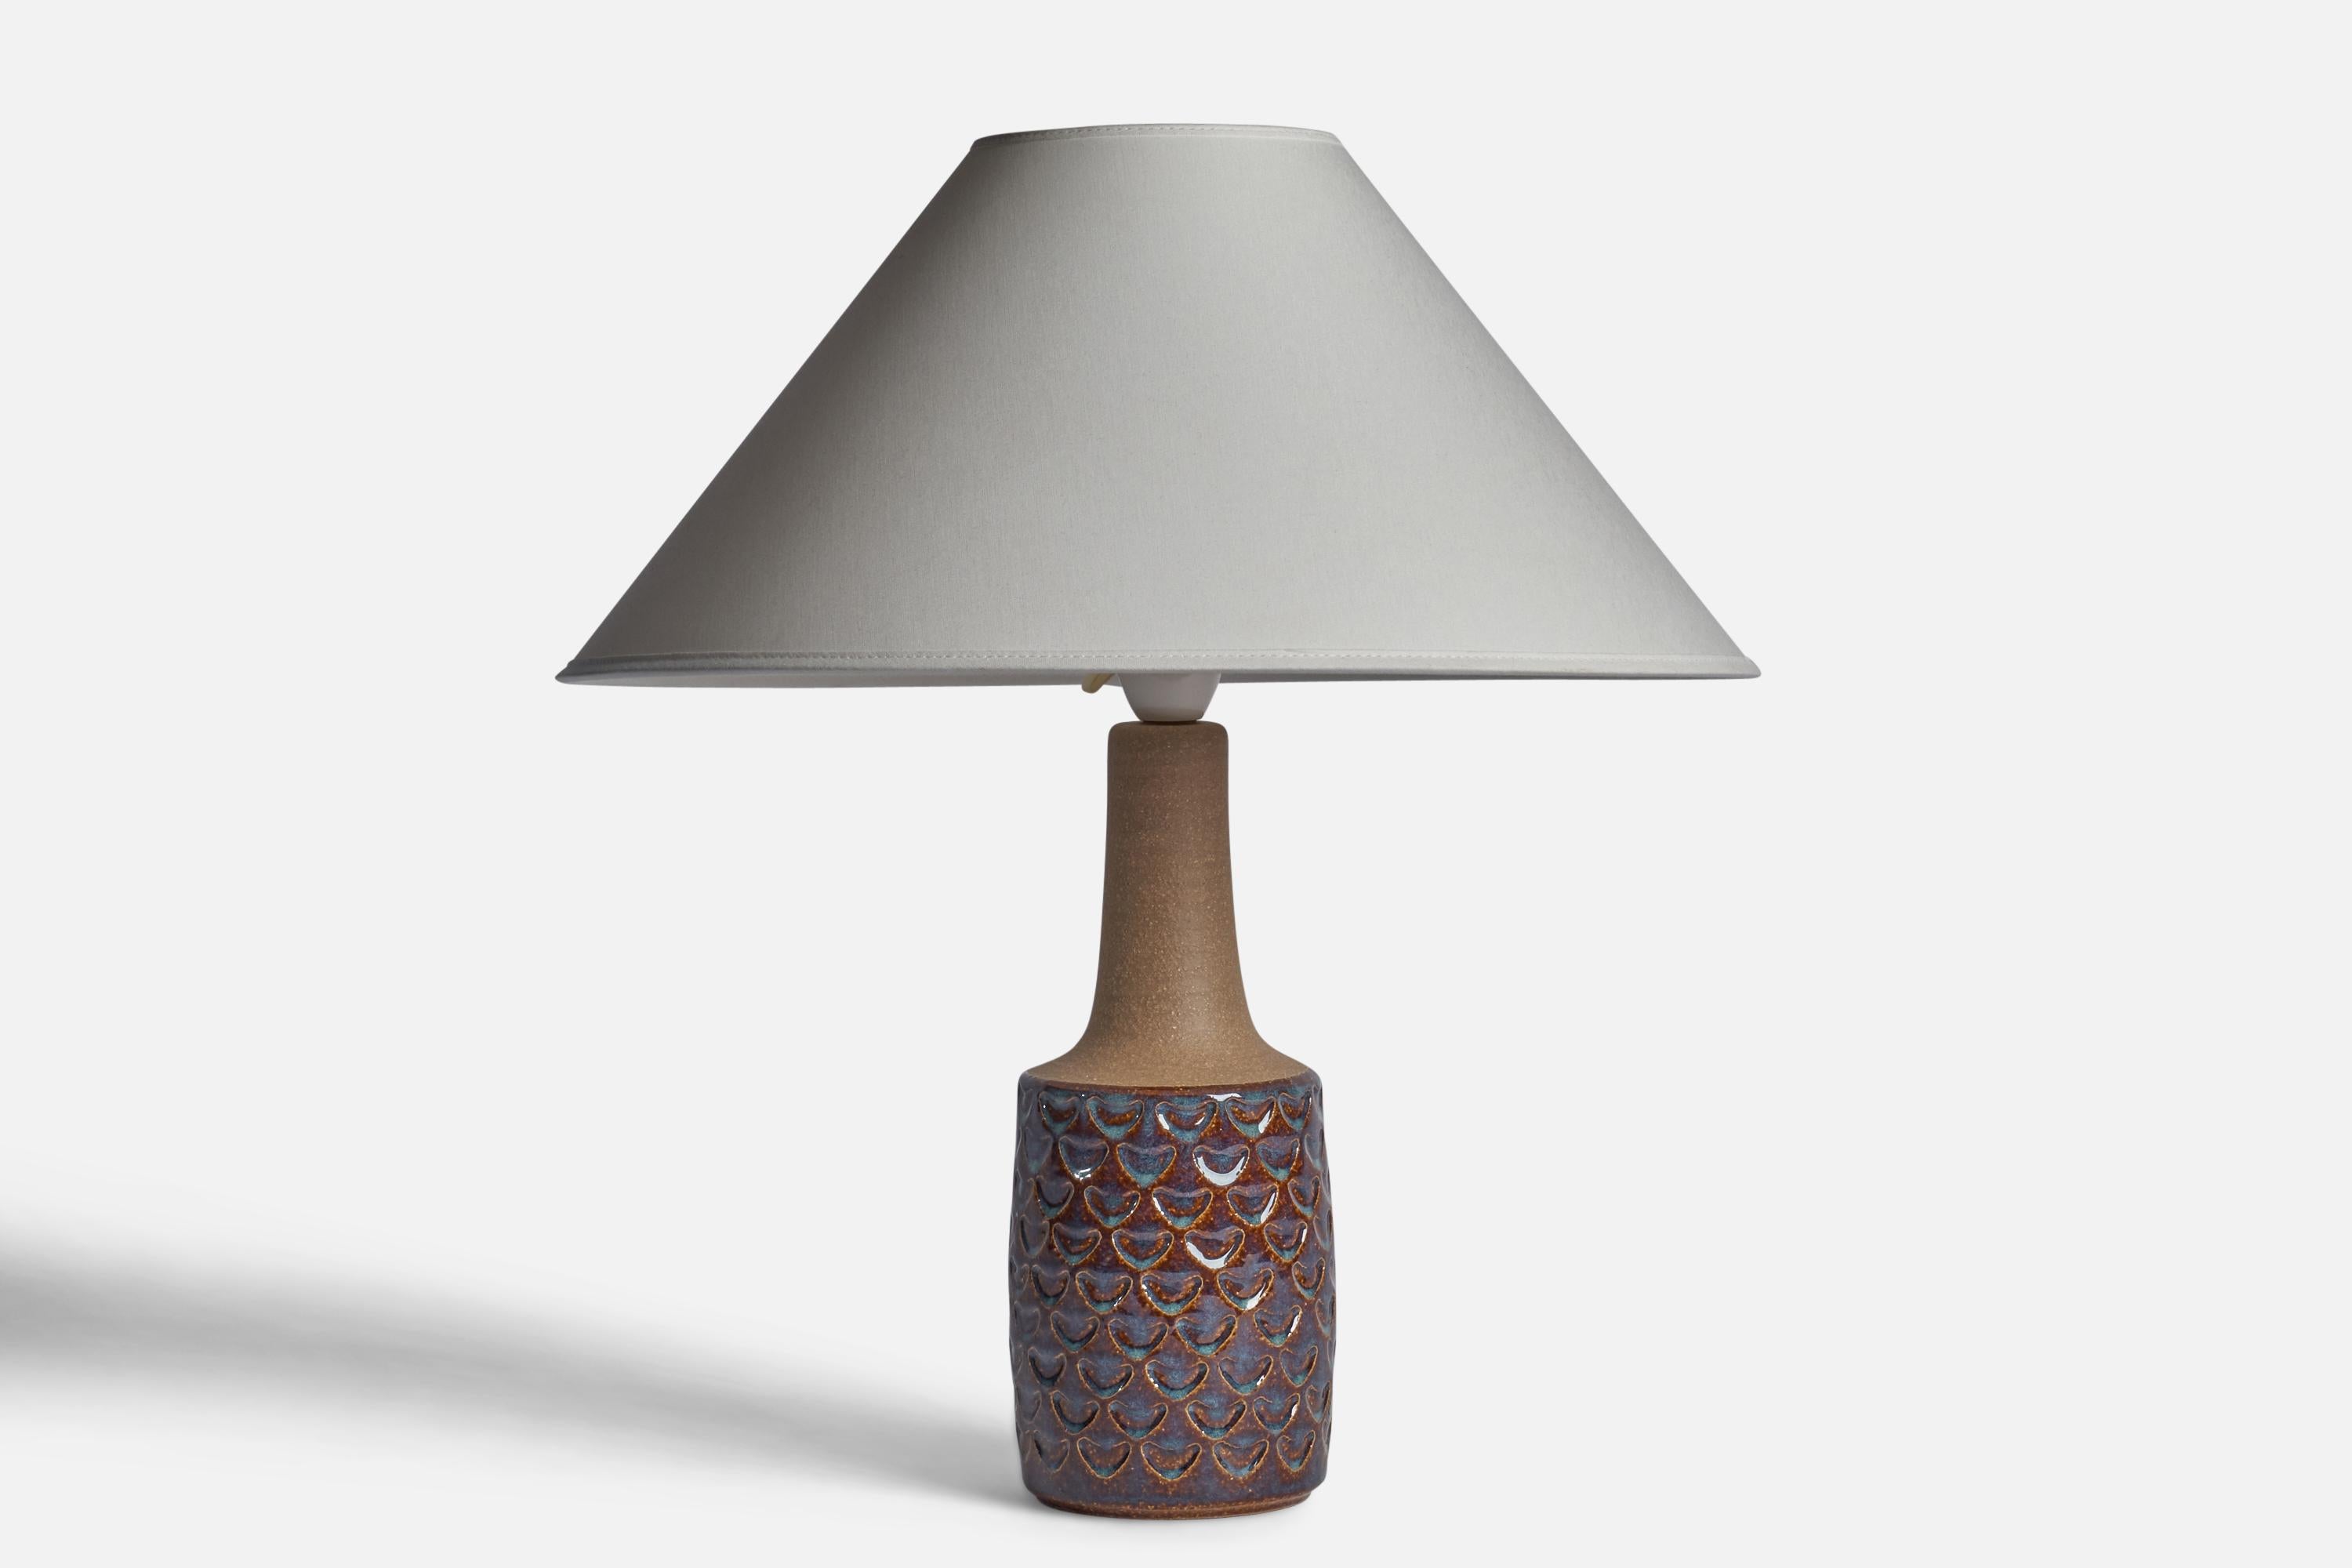 A brown and blue-glazed stoneware table lamp designed and produced in Sweden, 1960s.

Dimensions of Lamp (inches): 13.25”H x 4